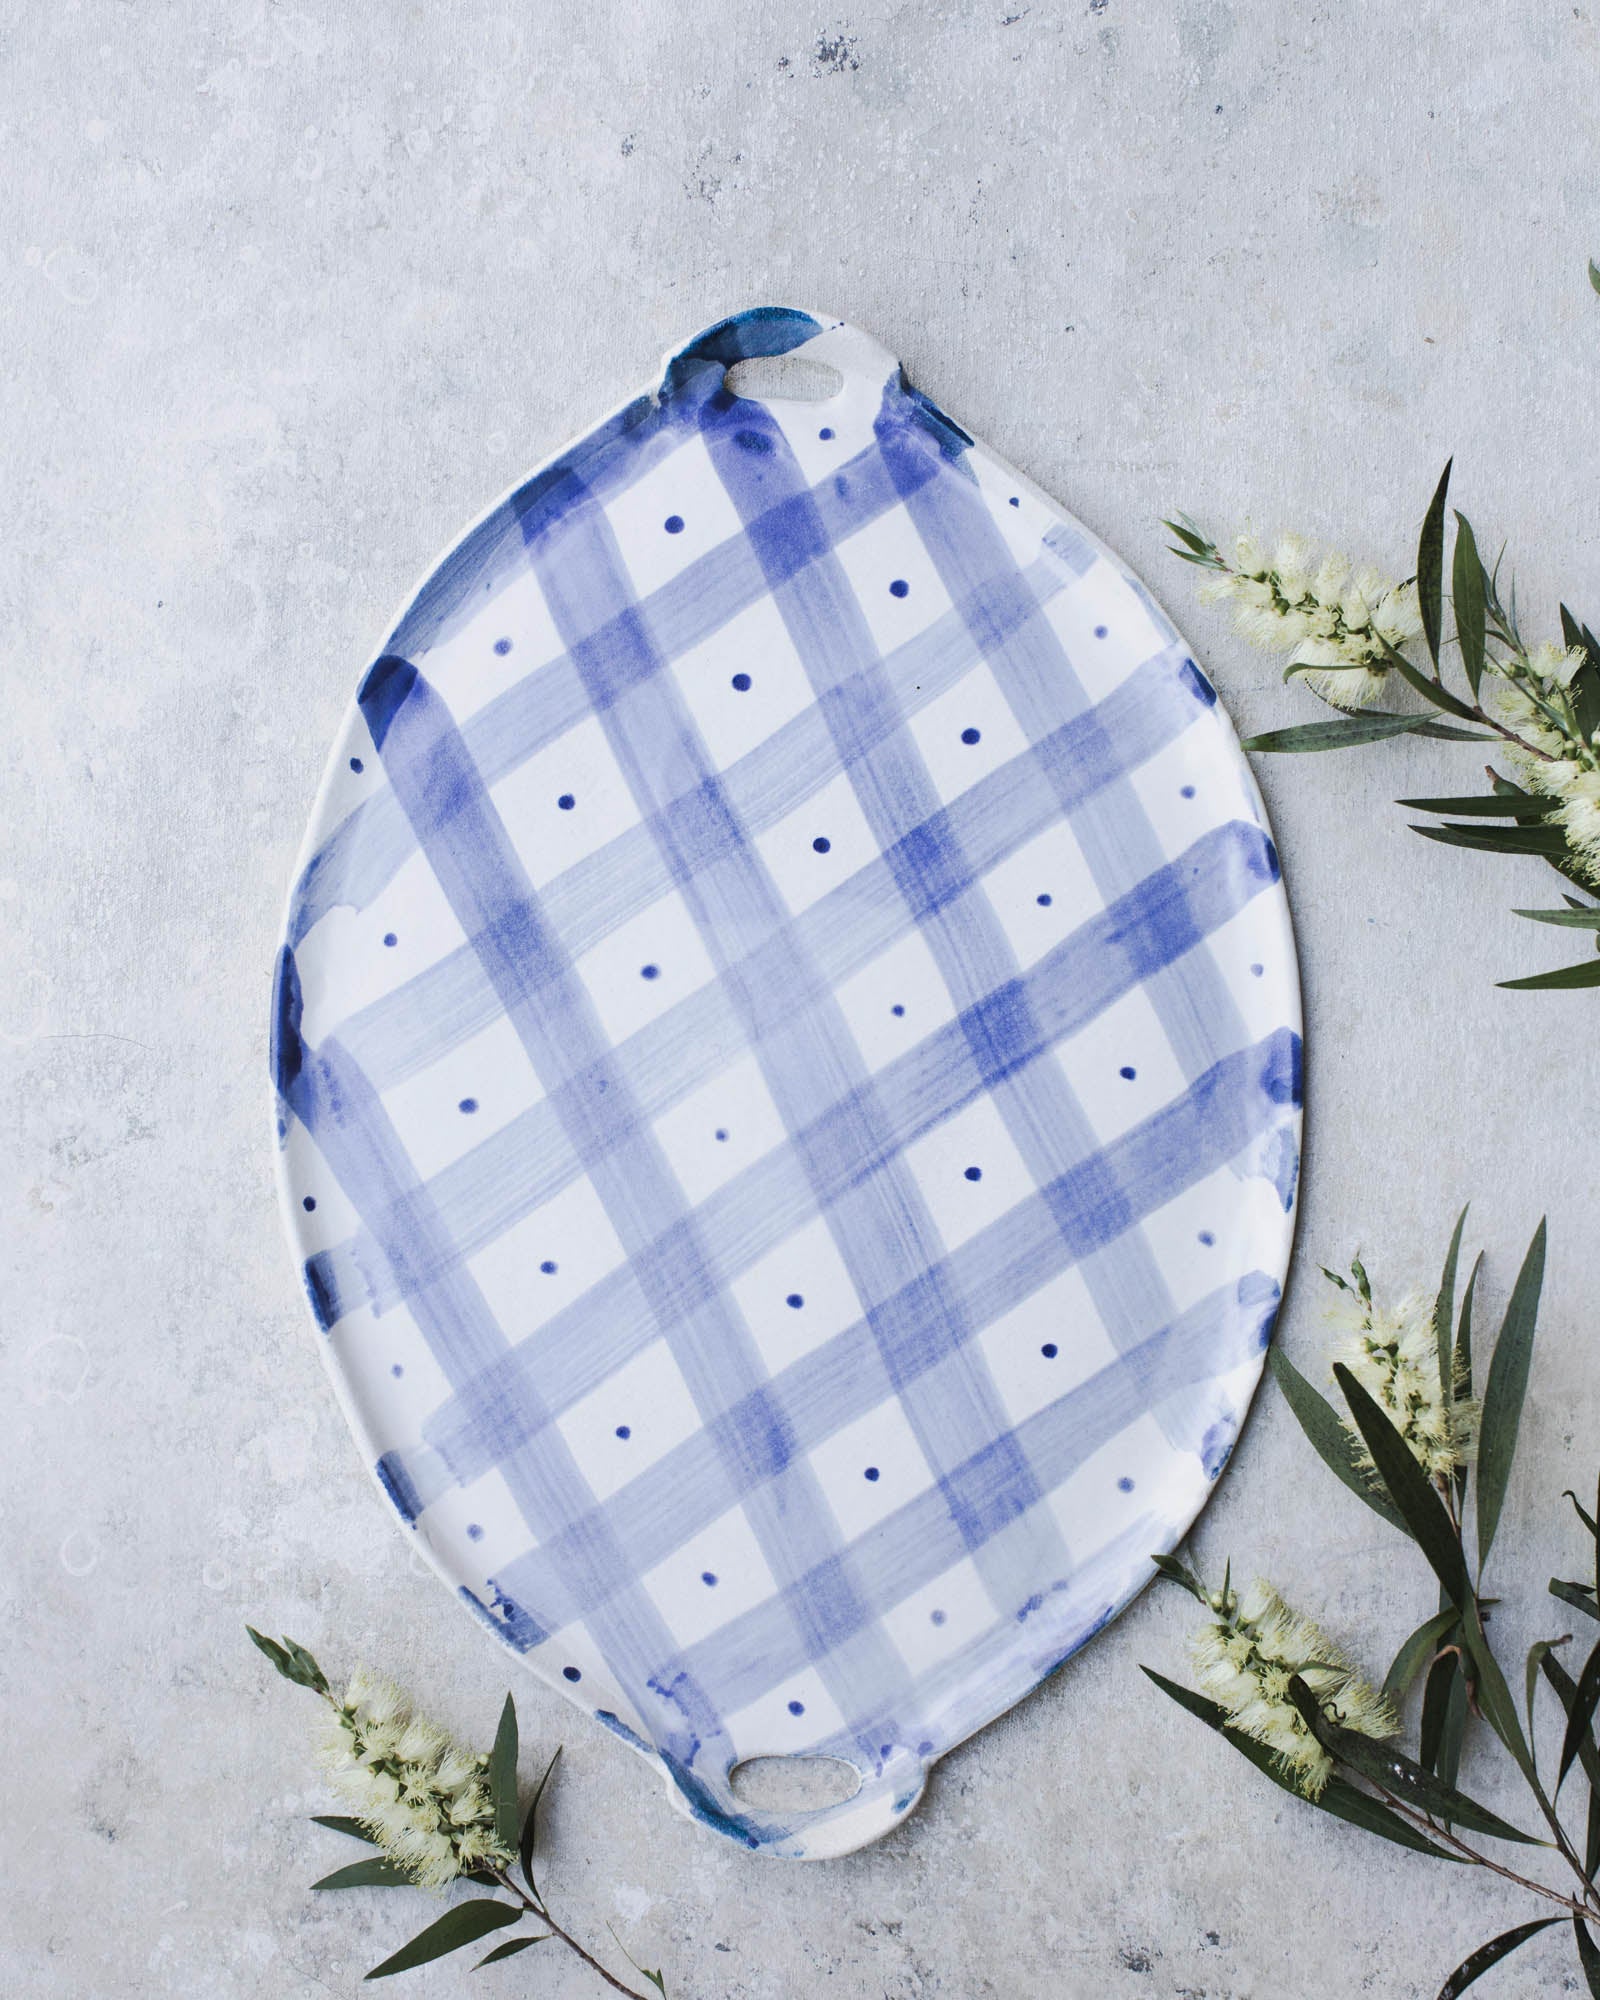 Blue and white diamond plaid patterned platter by clay beehive ceramics